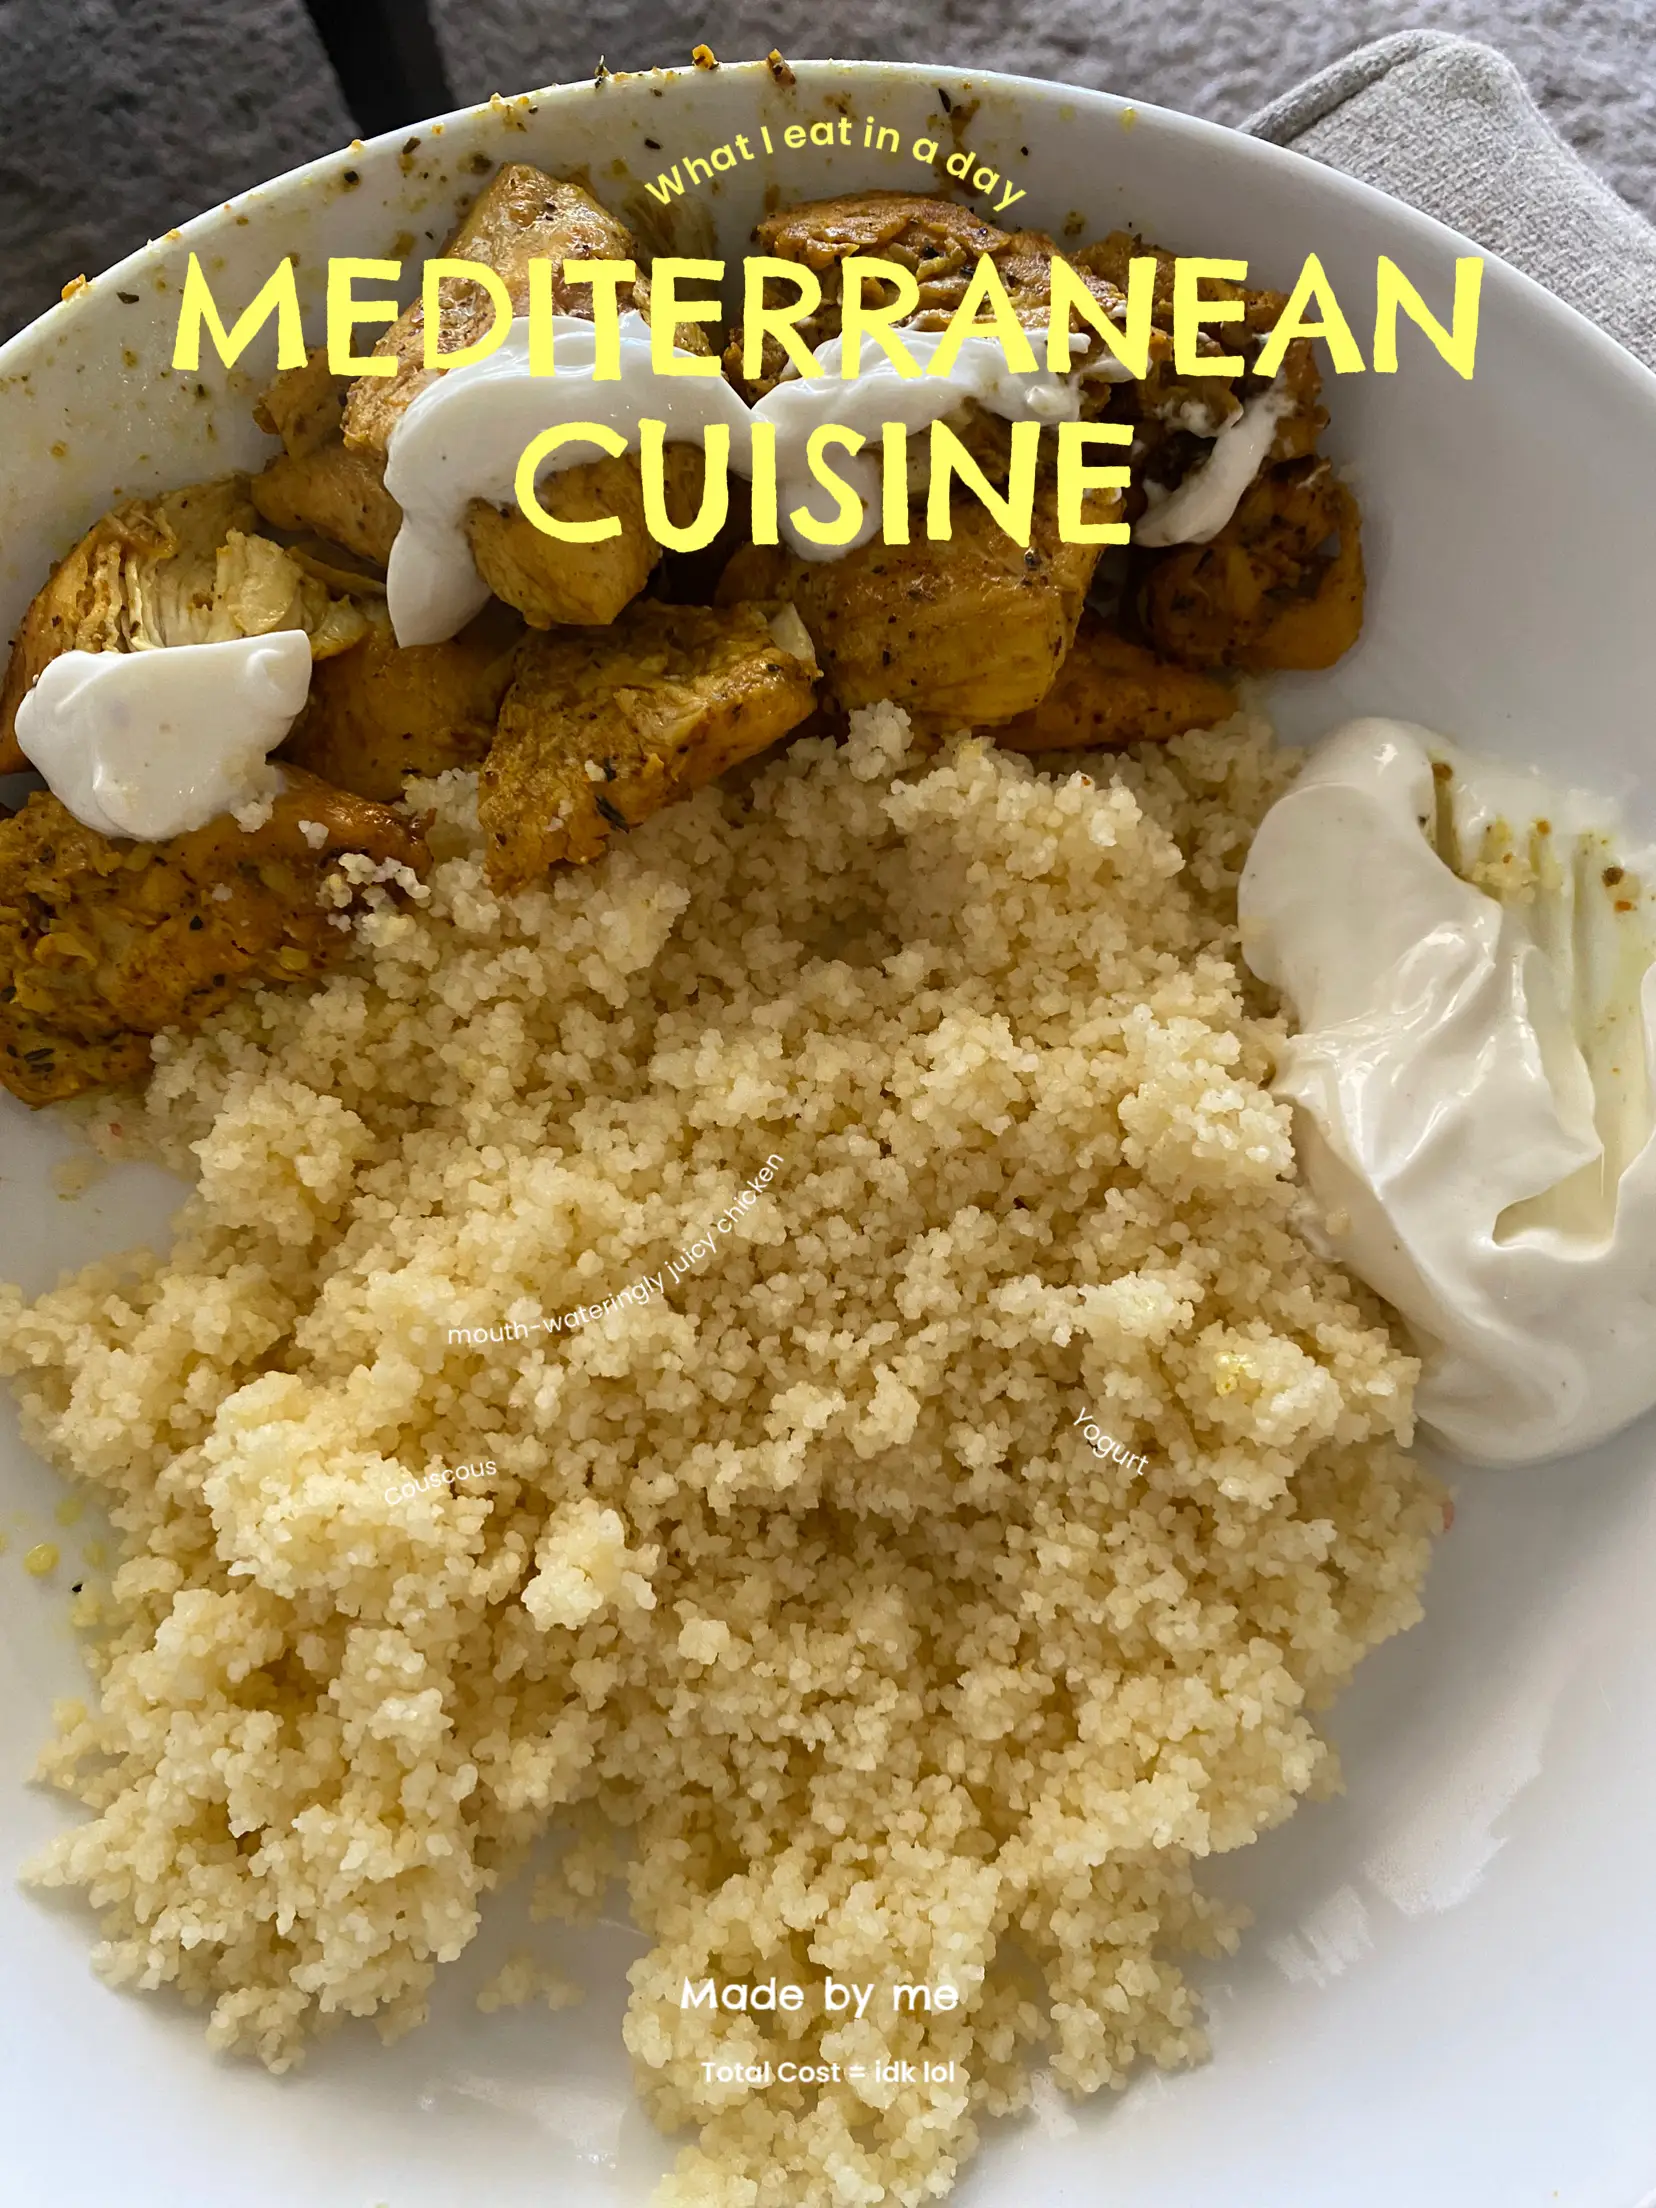  A plate of food with chicken, couscous, and yogurt.